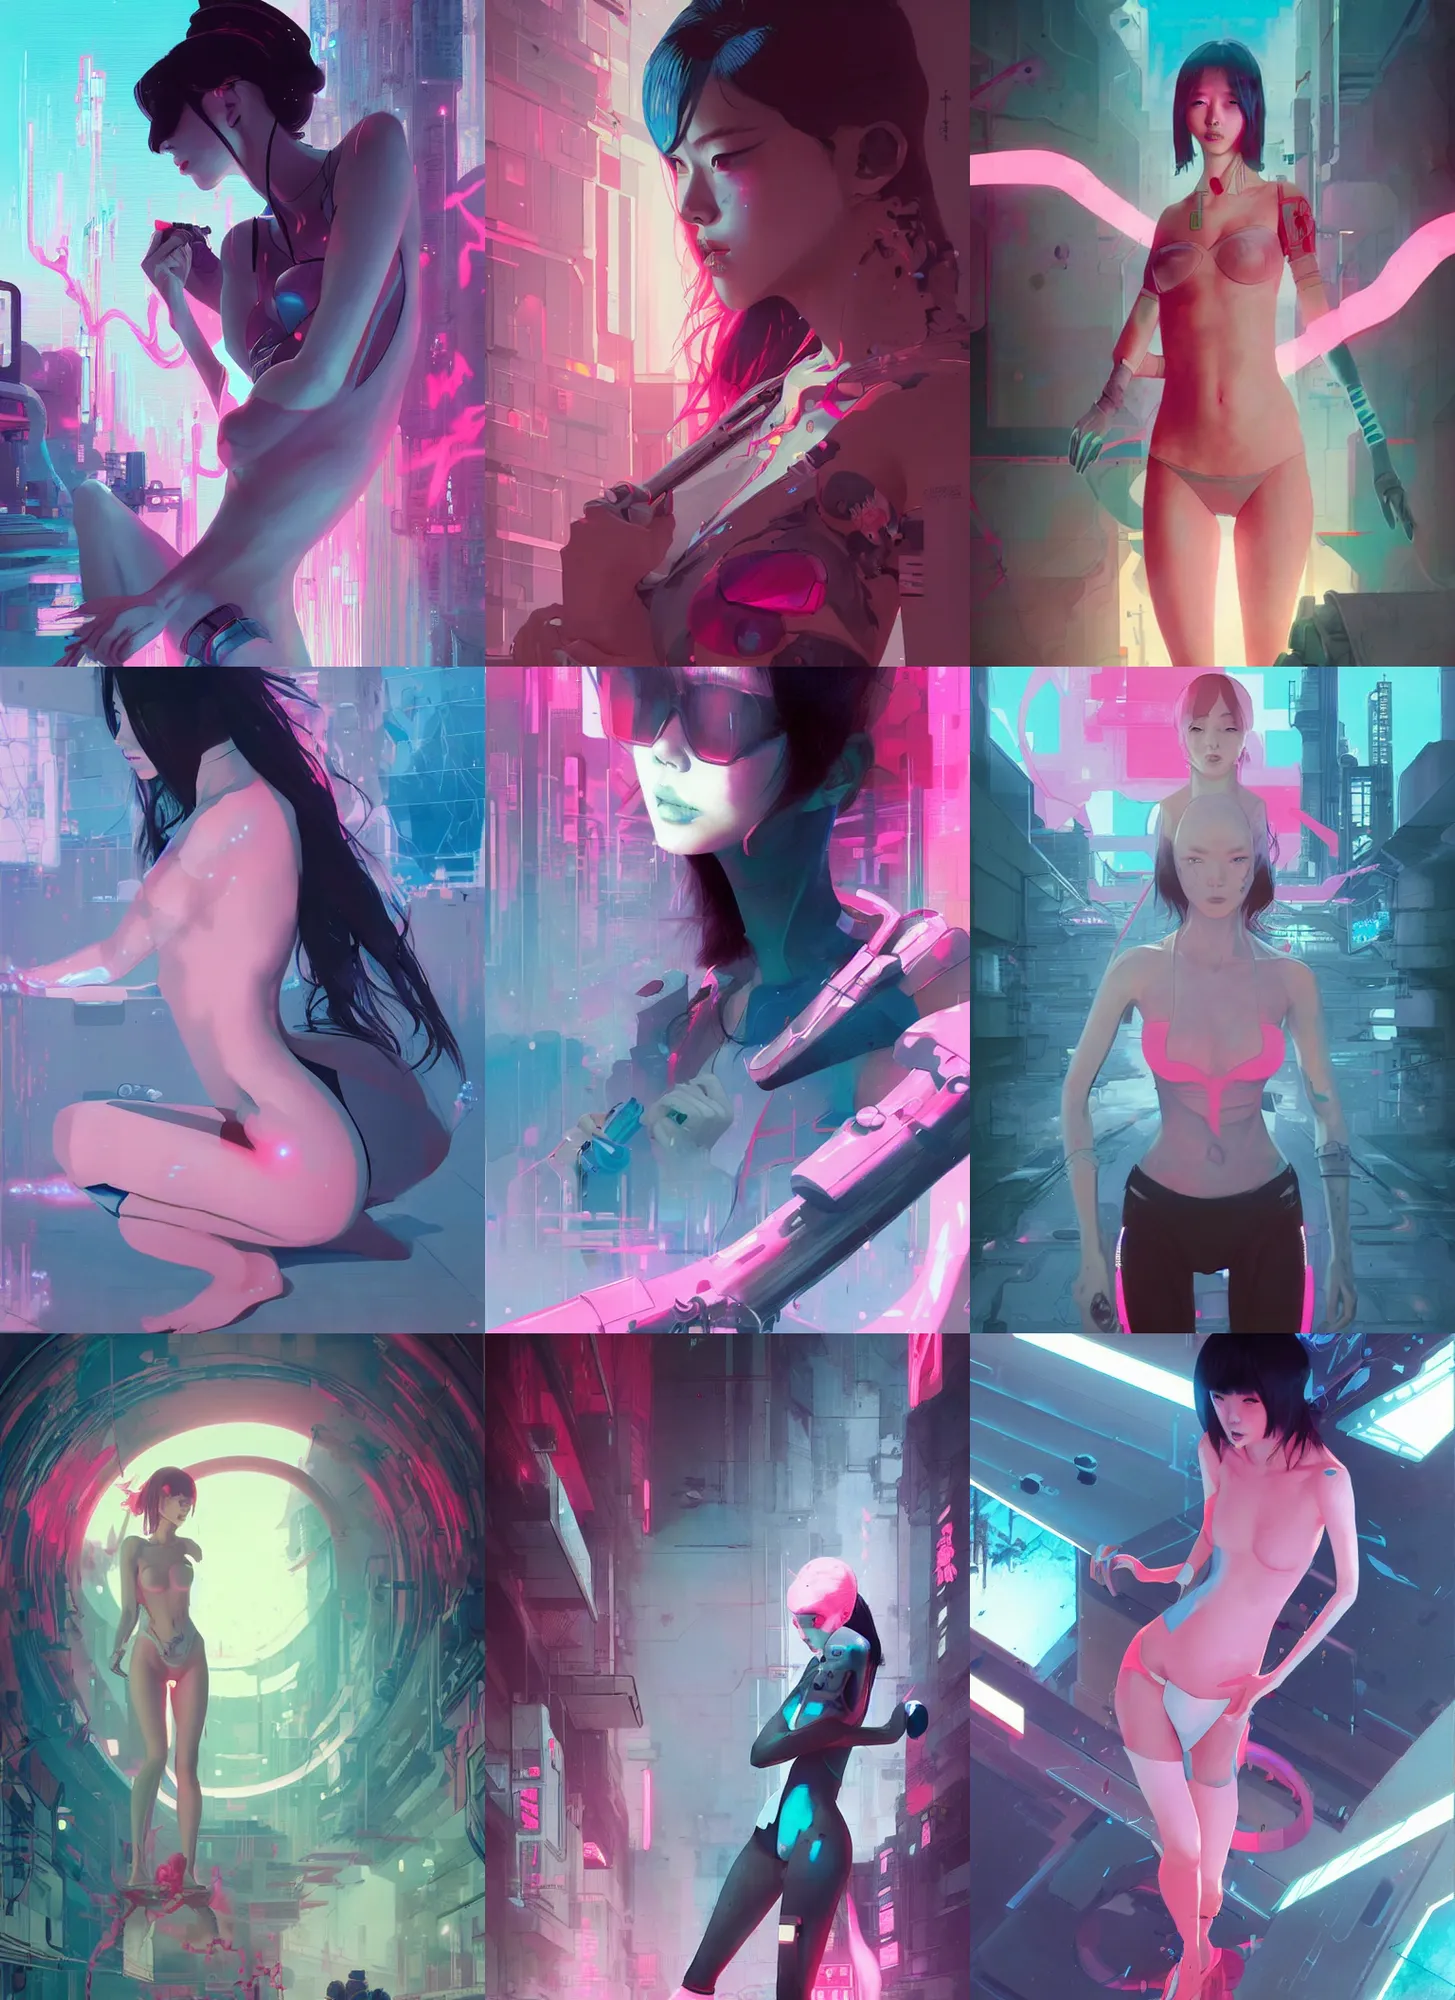 Prompt: lee jin - eun emerging from pink water in cyberpunk theme by ilya kuvshinov and peter mohrbacher, and m. k. kaluta, rule of thirds, seductive look, beautiful